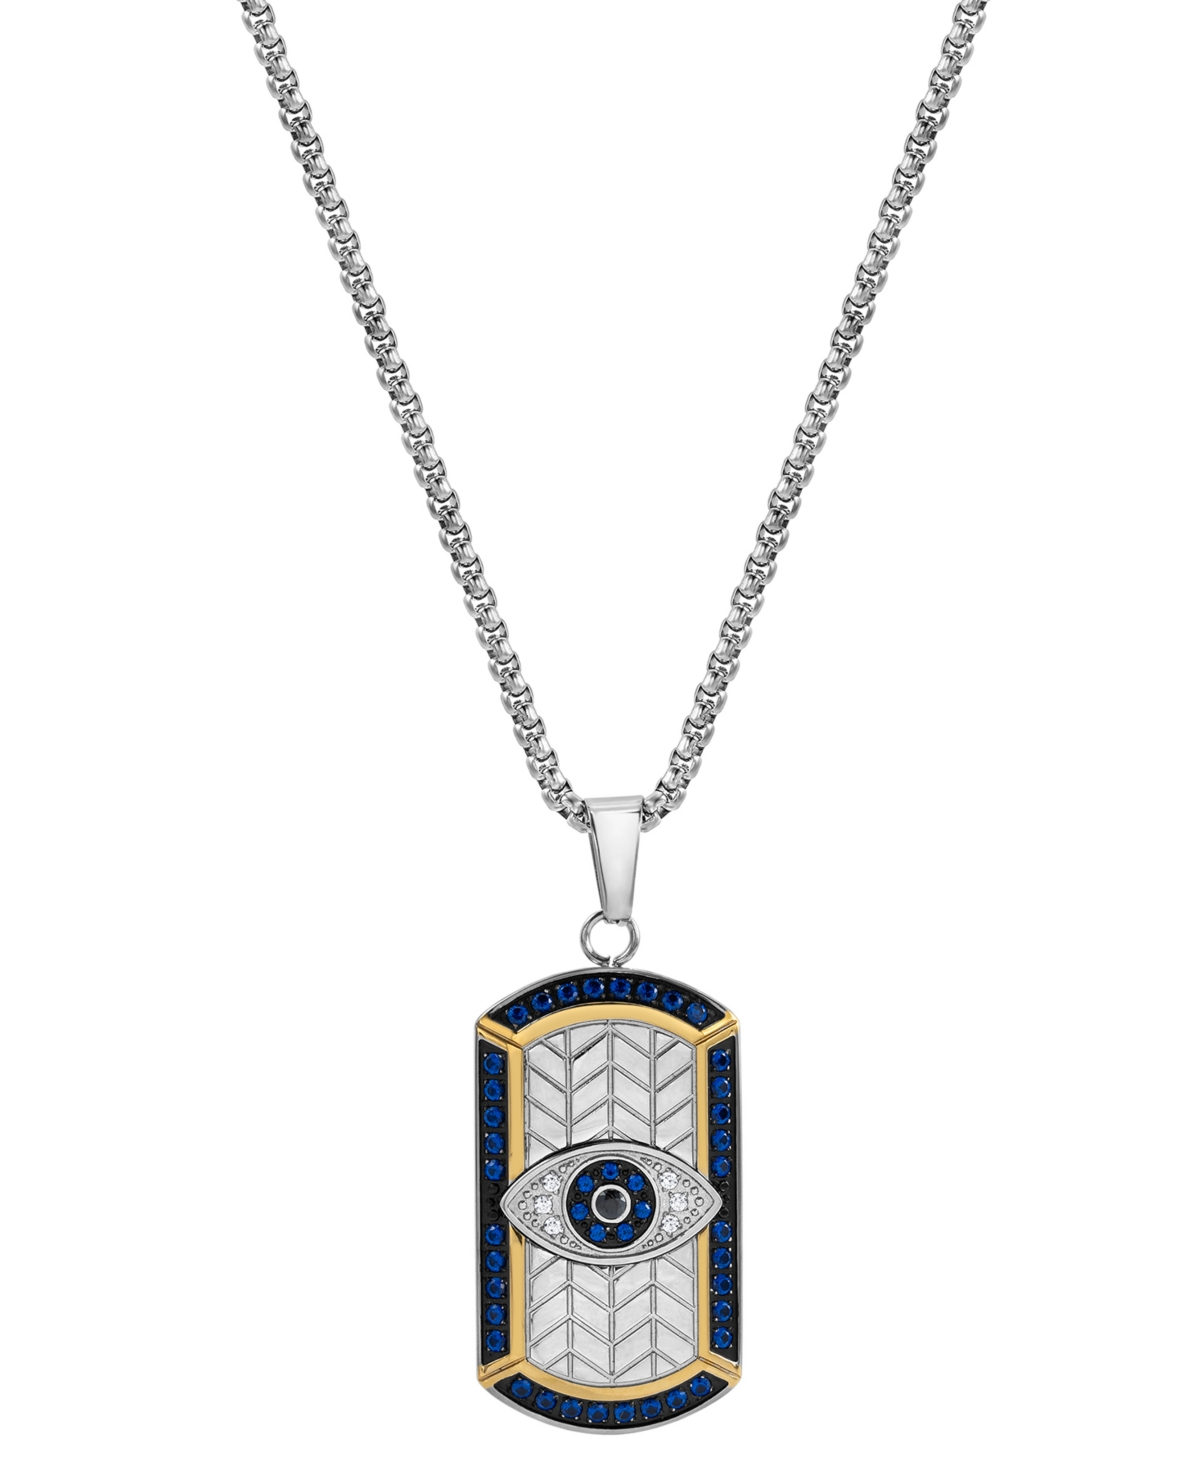 Multicolor Cubic Zirconia Evil Eye Dog Tag 24" Pendant Necklace in Sterling Silver and Black- & Gold-Tone Ion-Plate - Steel